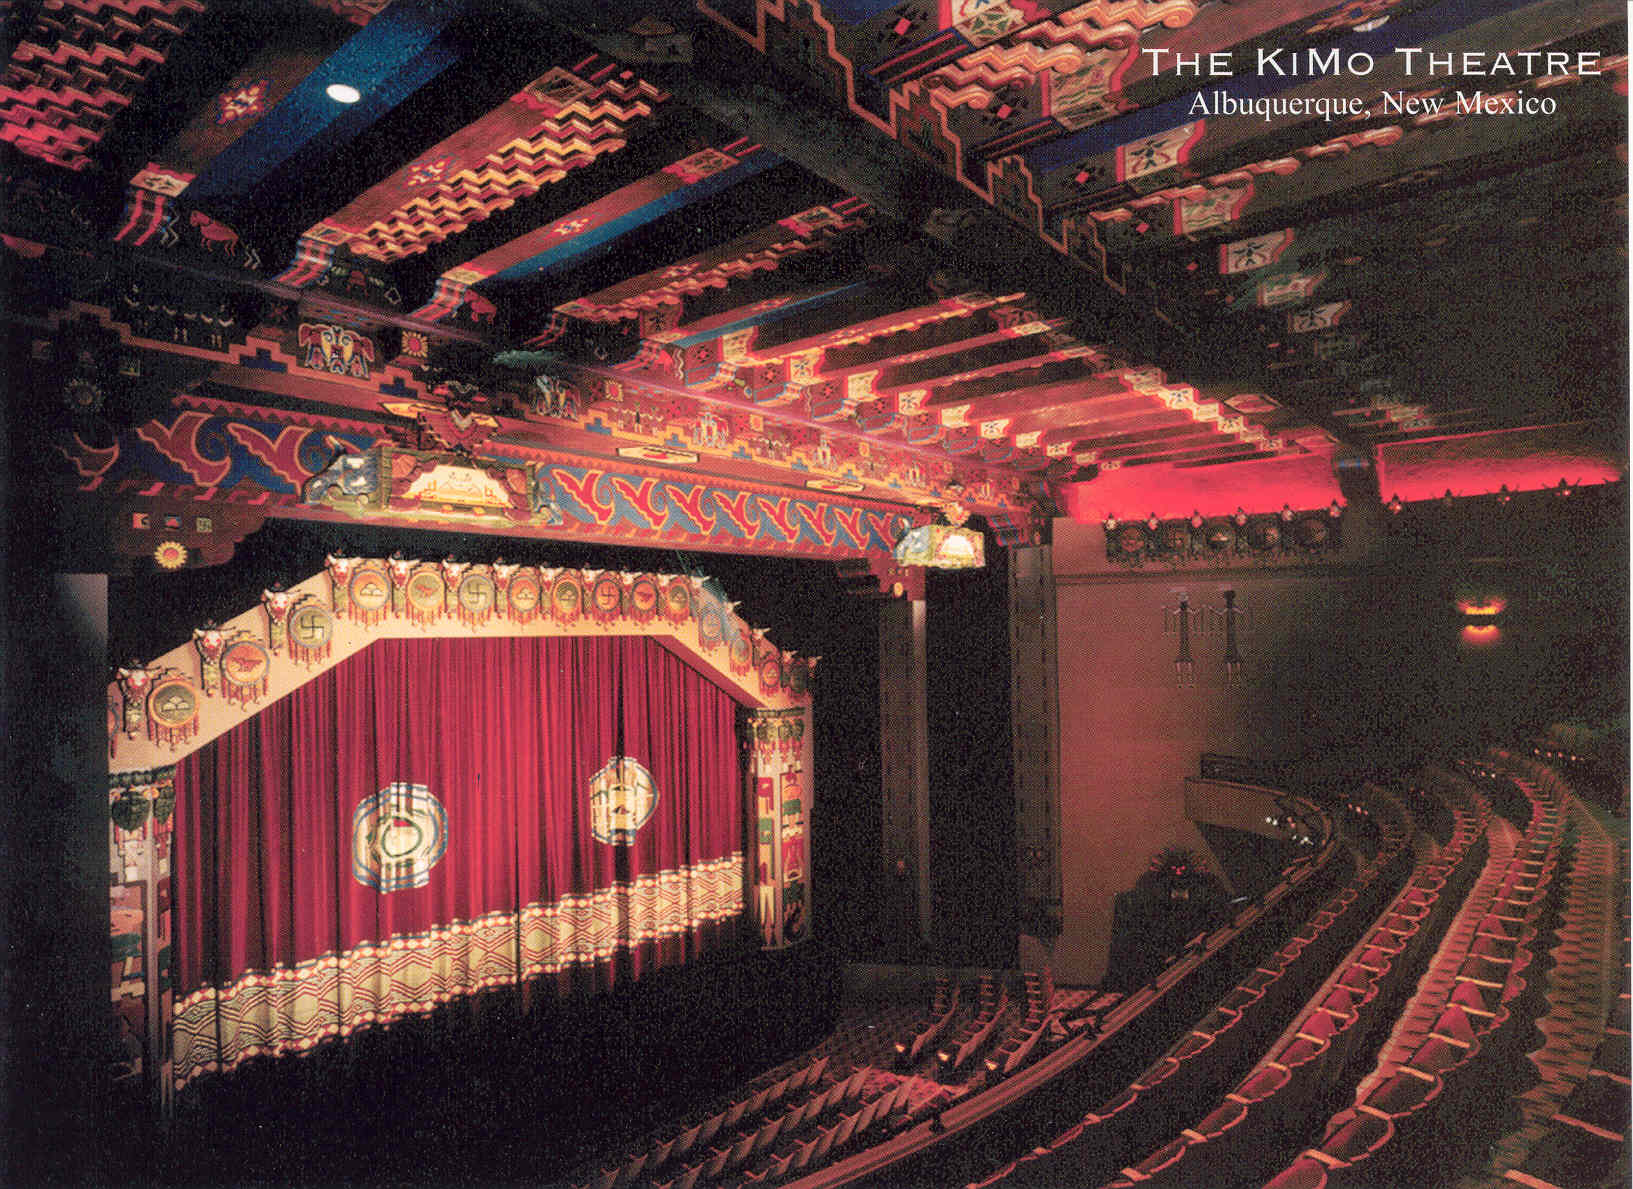 A view of the interior KiMo Theatre stage taken from the balcony.